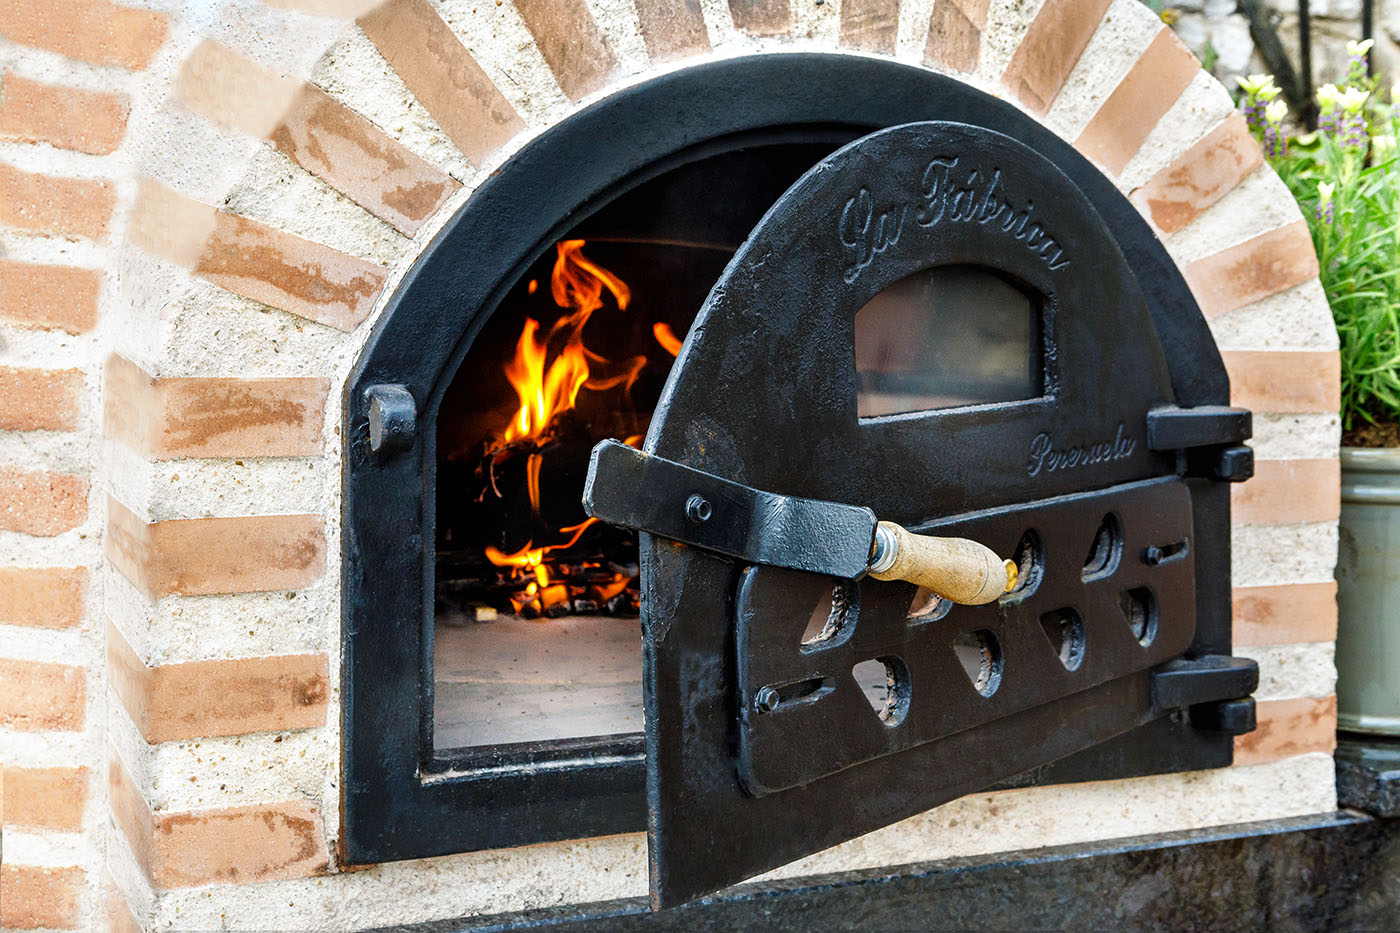 How to light a wood fired pizza oven - Fuego Clay Ovens